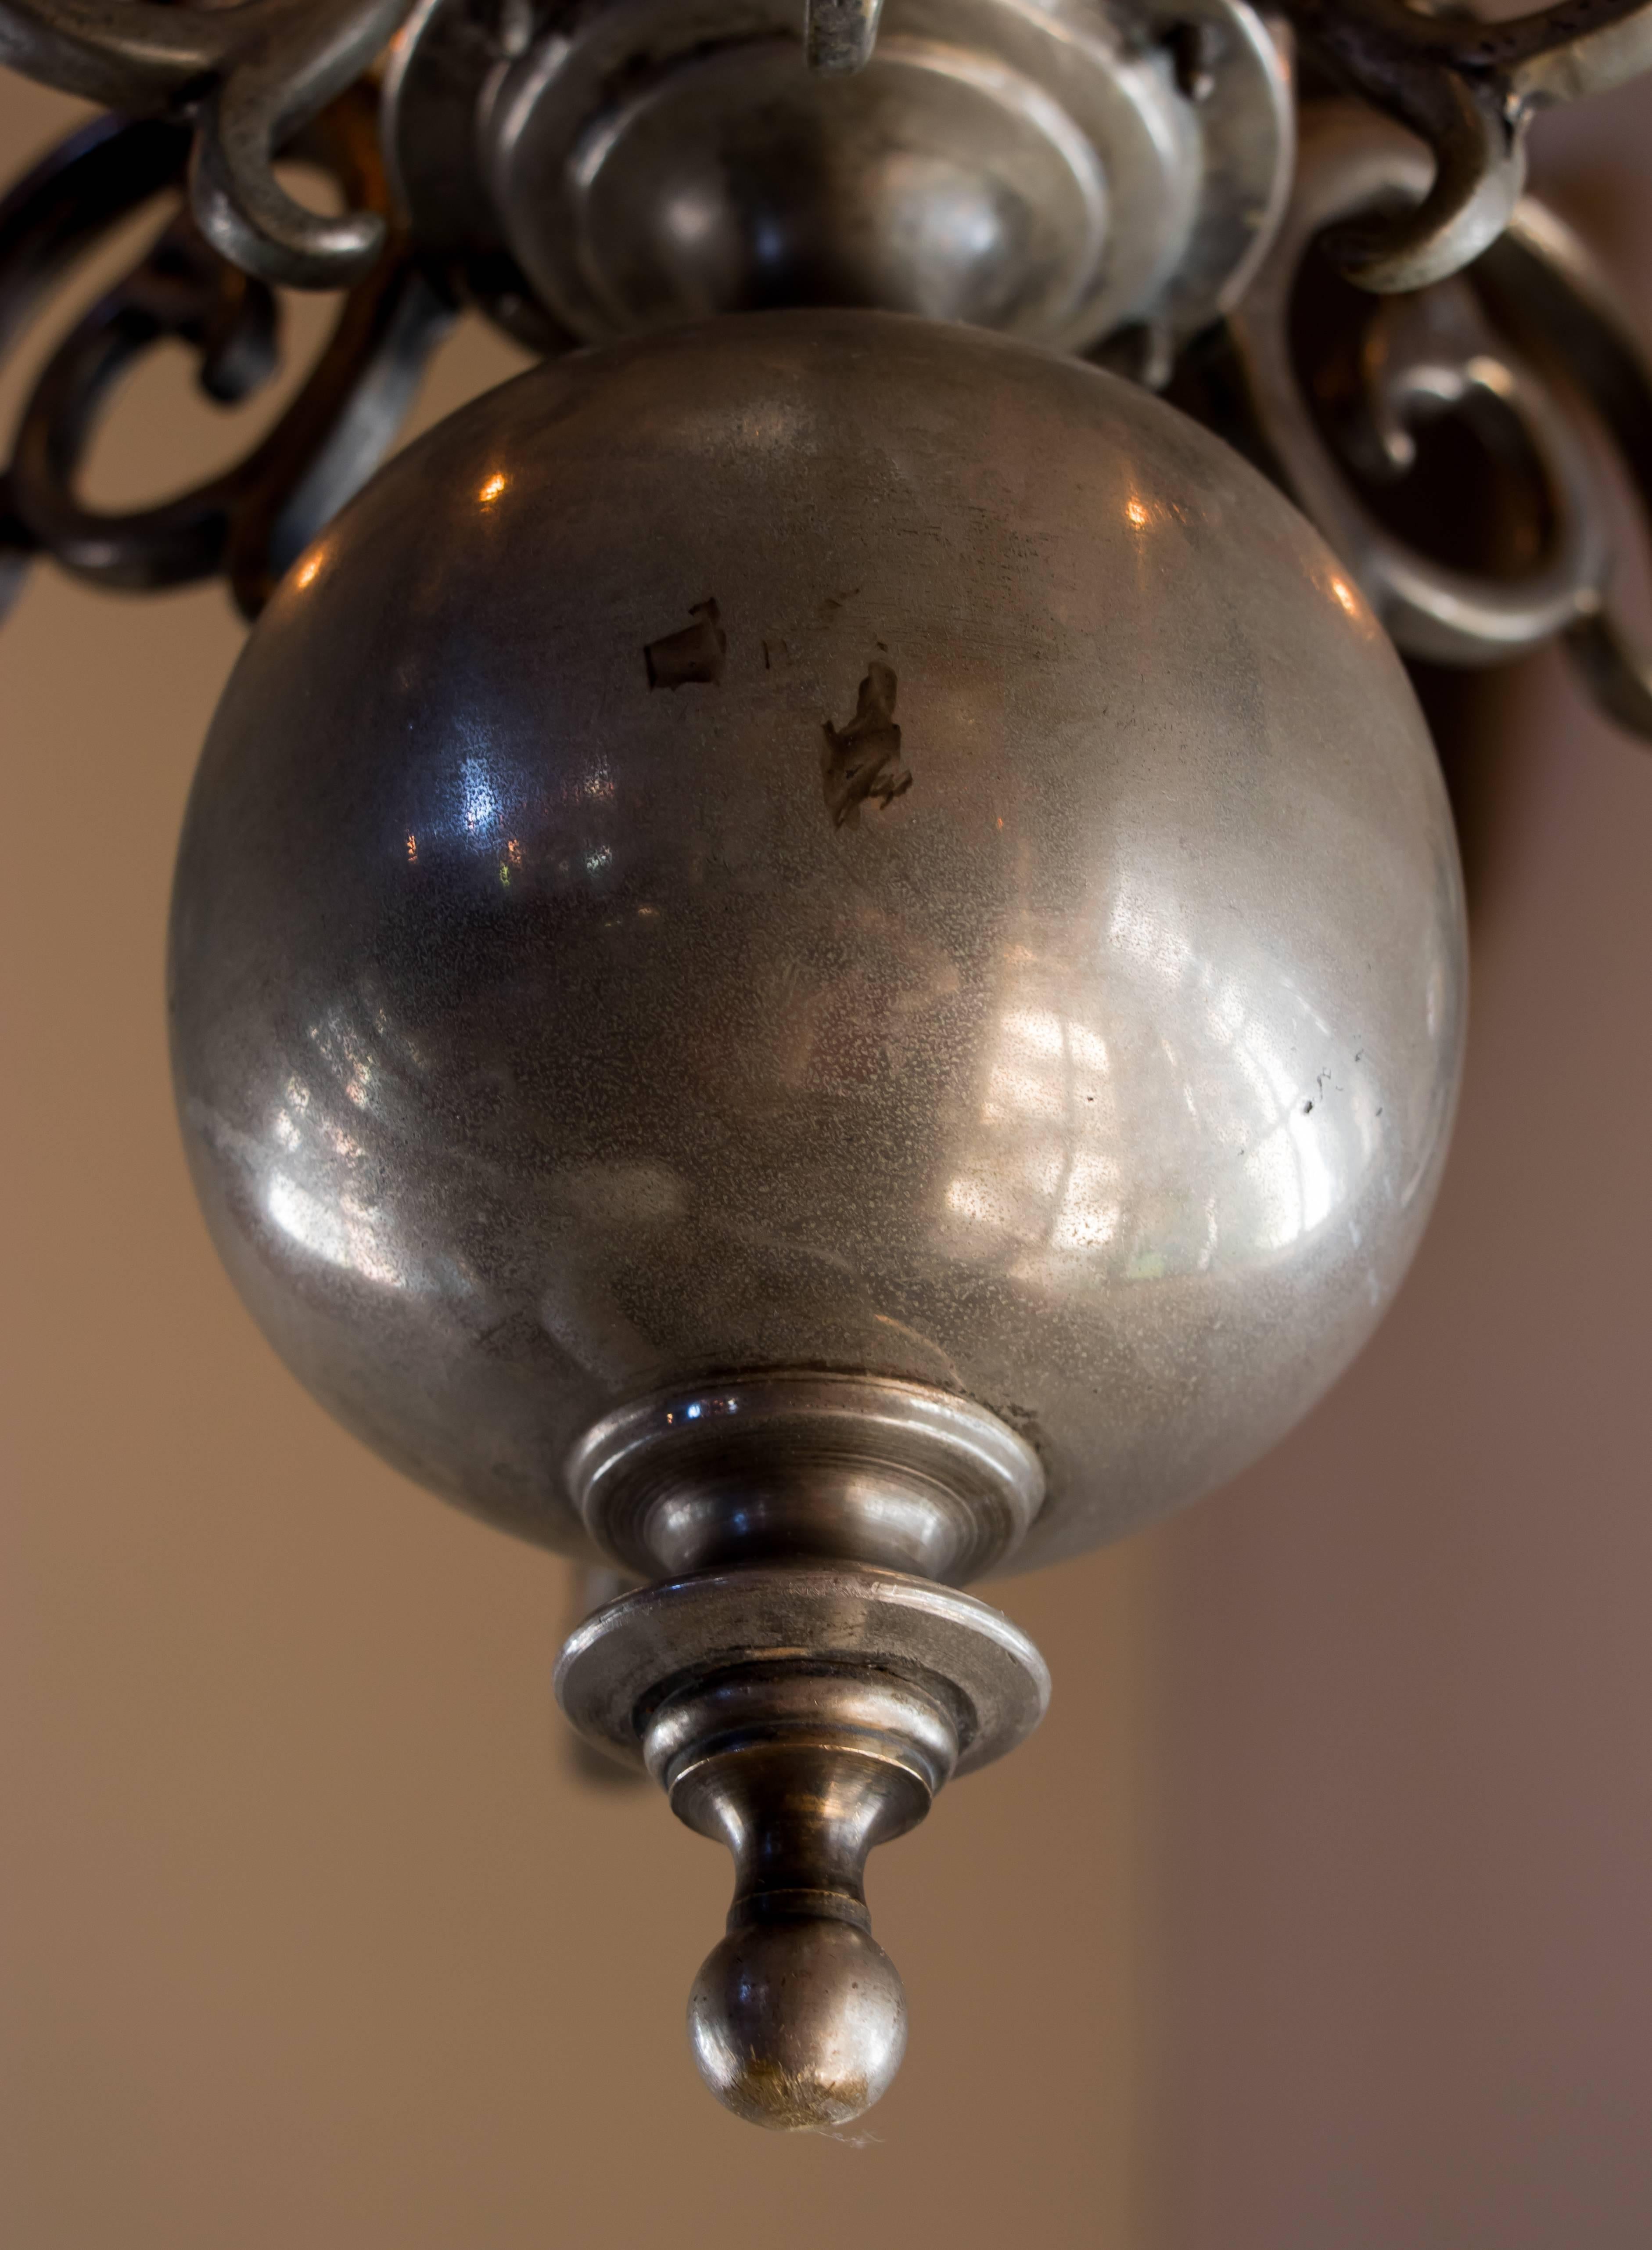 Georgian style classic chandelier with six arms. This nickel-on-bronze chandelier has a beautiful patina that has a bit of a pewter color, but is much harder and heavier than pewter. This vintage Flemish-style light is a true classic that has a